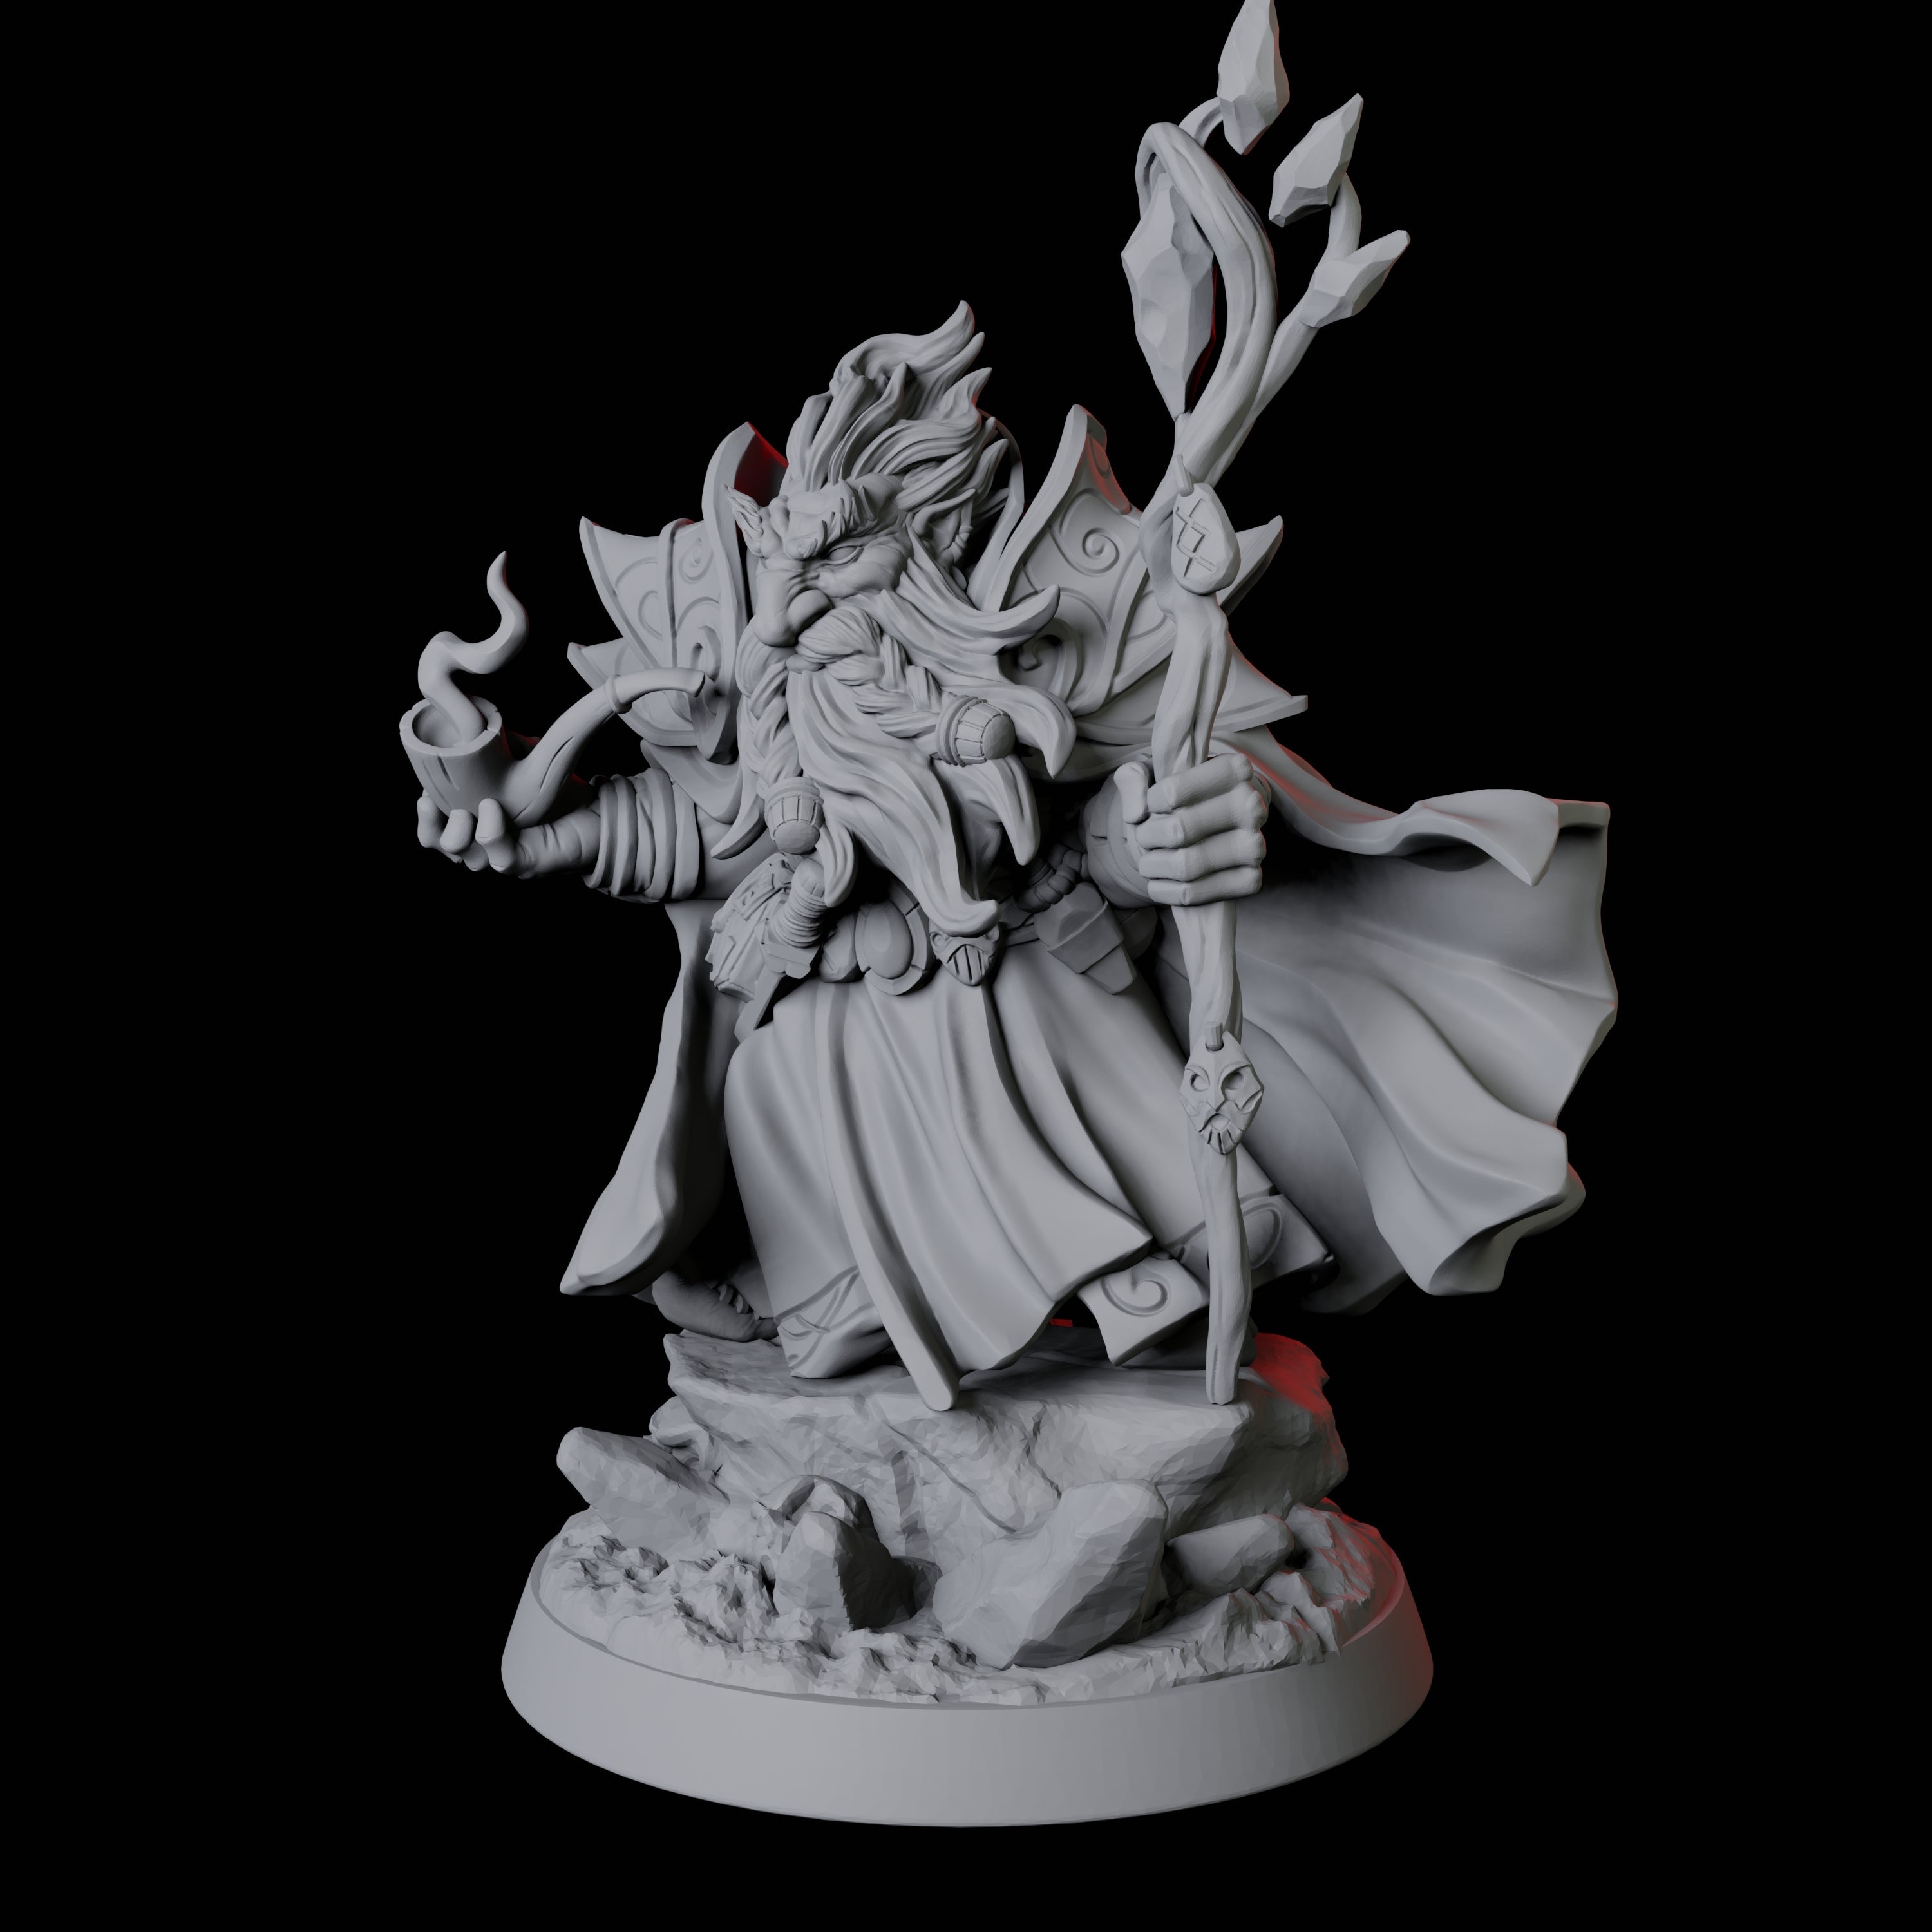 Pipe Smoking Dwarf Wizard Miniature for Dungeons and Dragons, Pathfinder or other TTRPGs